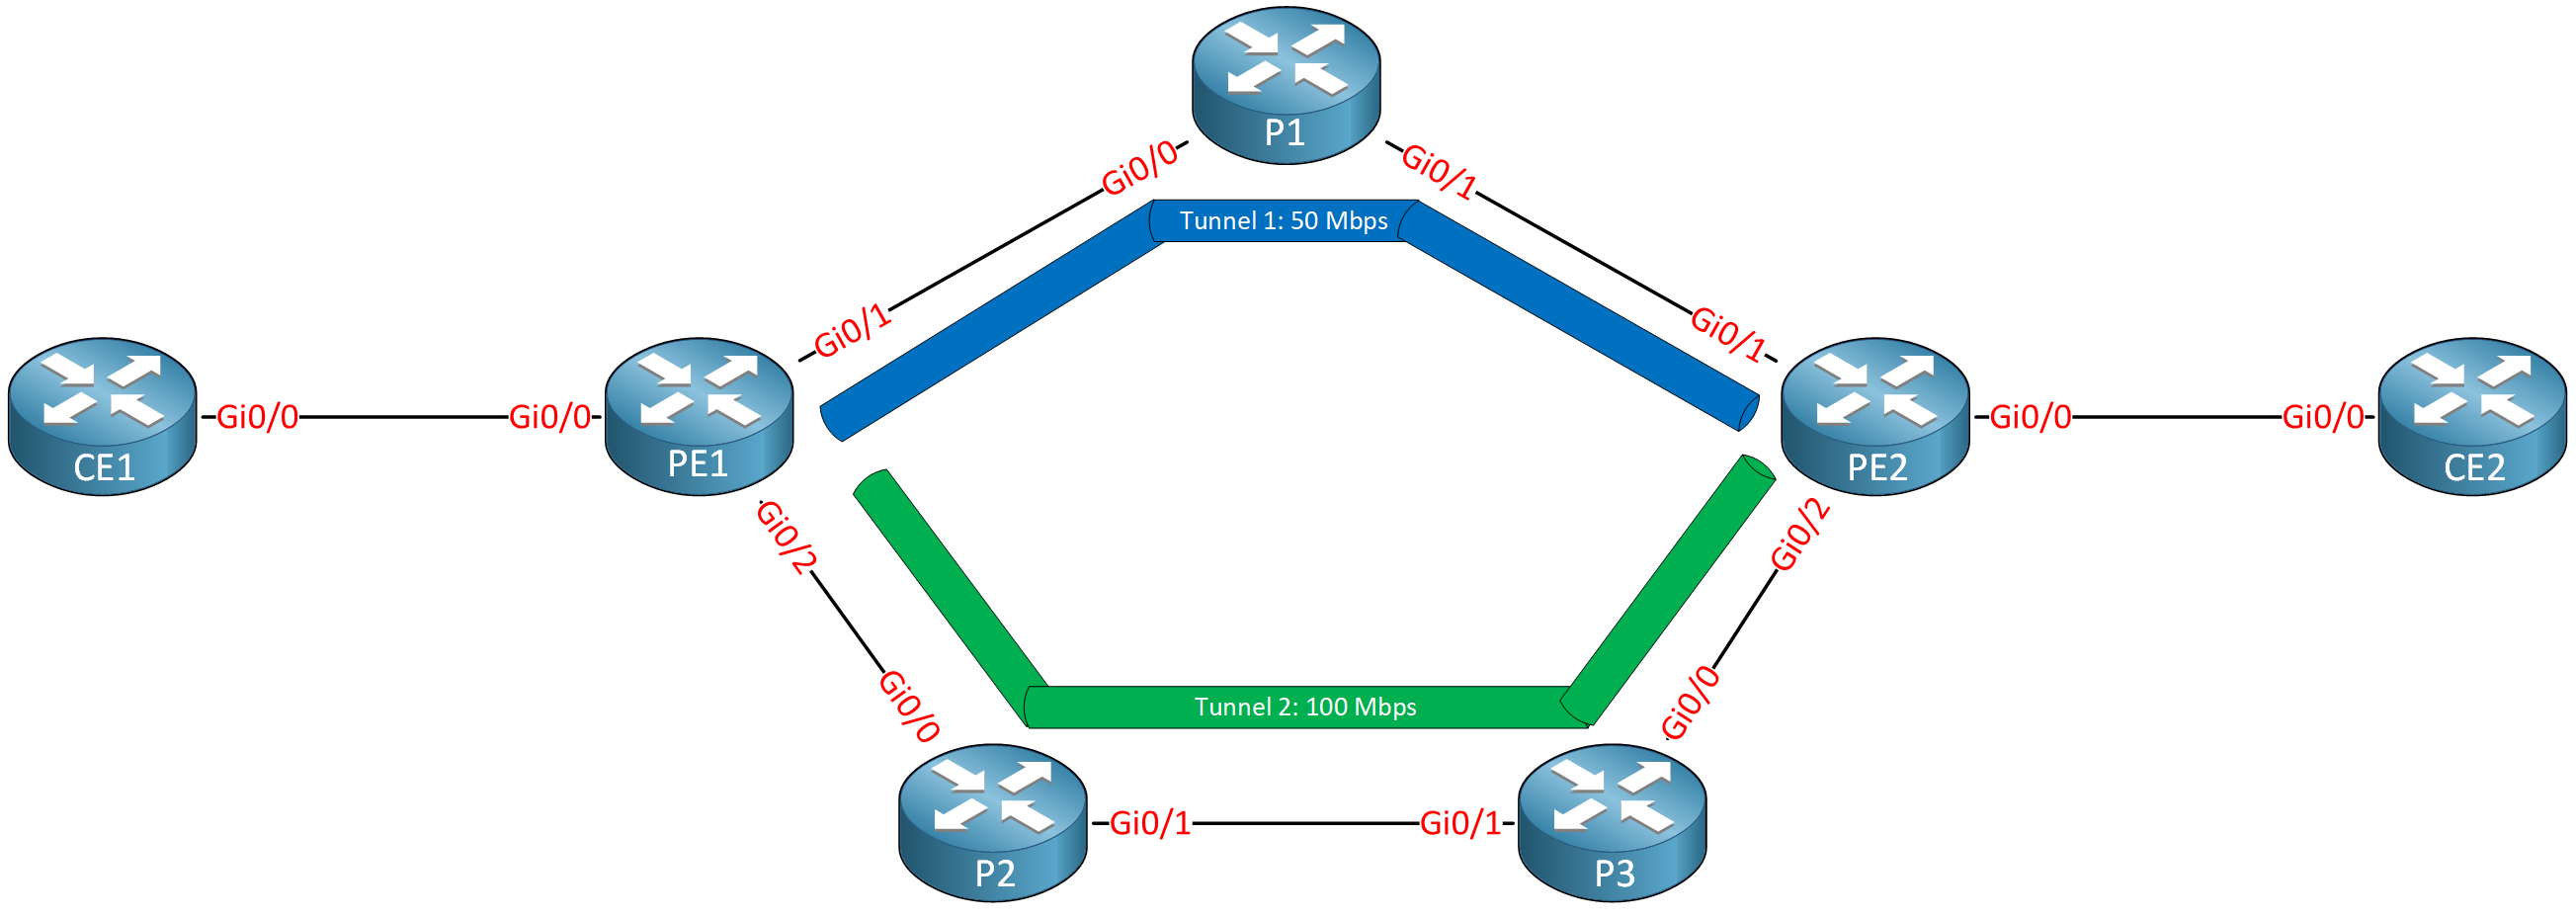 Mpls Te Two Tunnels Load Balancing